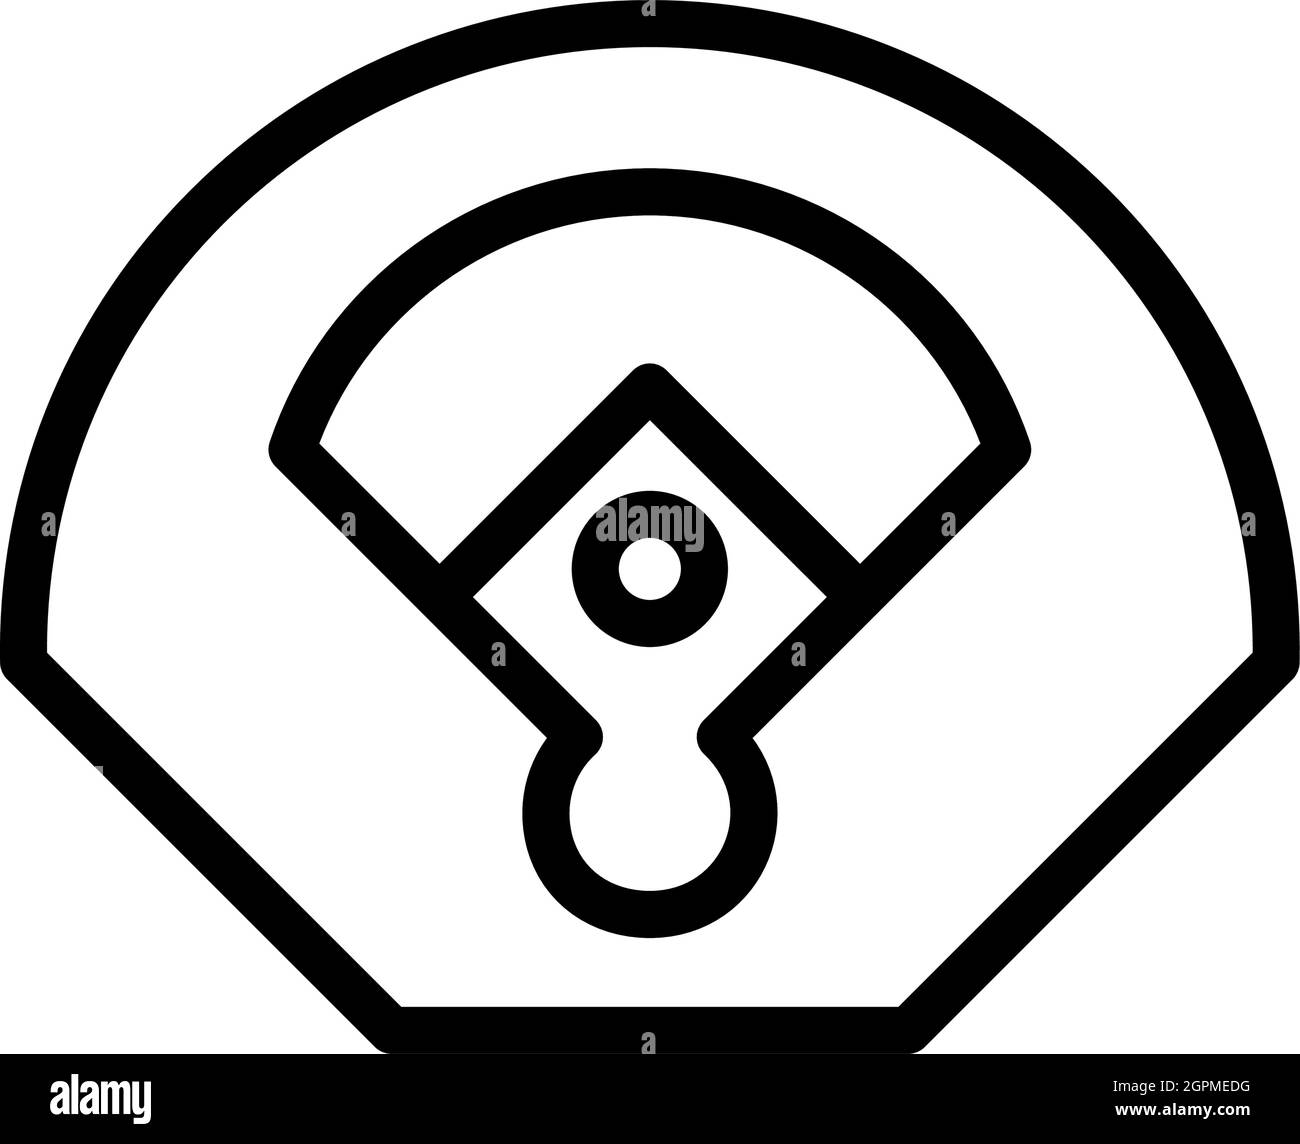 Baseball Field Aerial View Icon Stock Vector